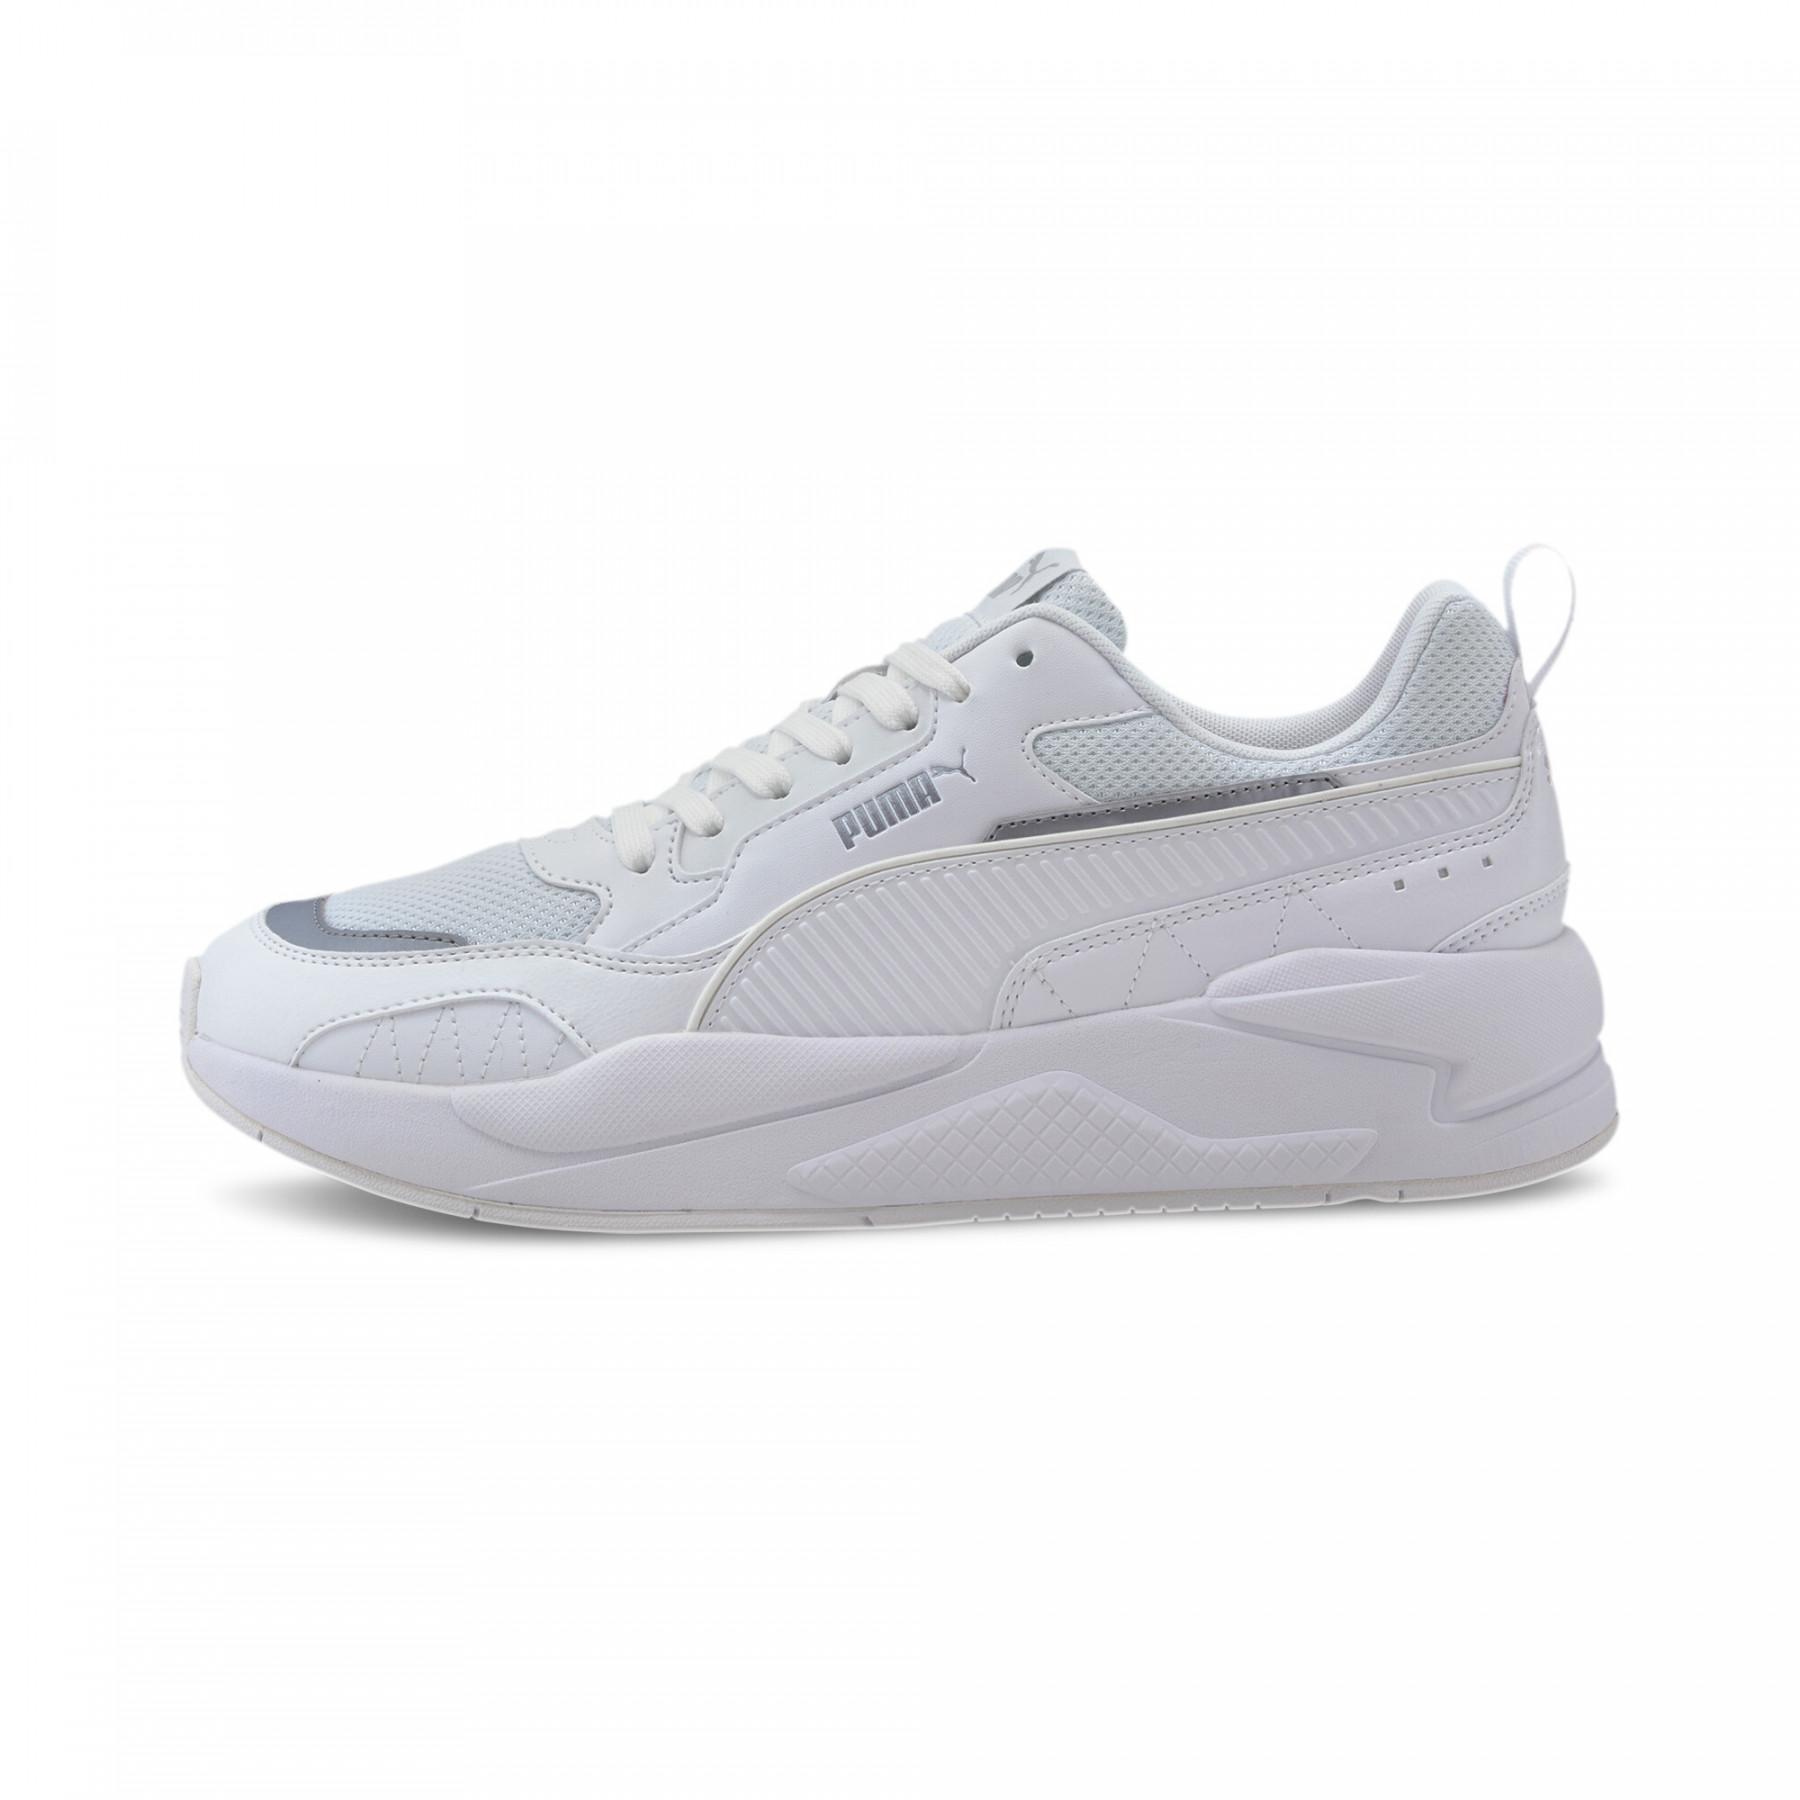 Sneakers Puma X-Ray 2 Square